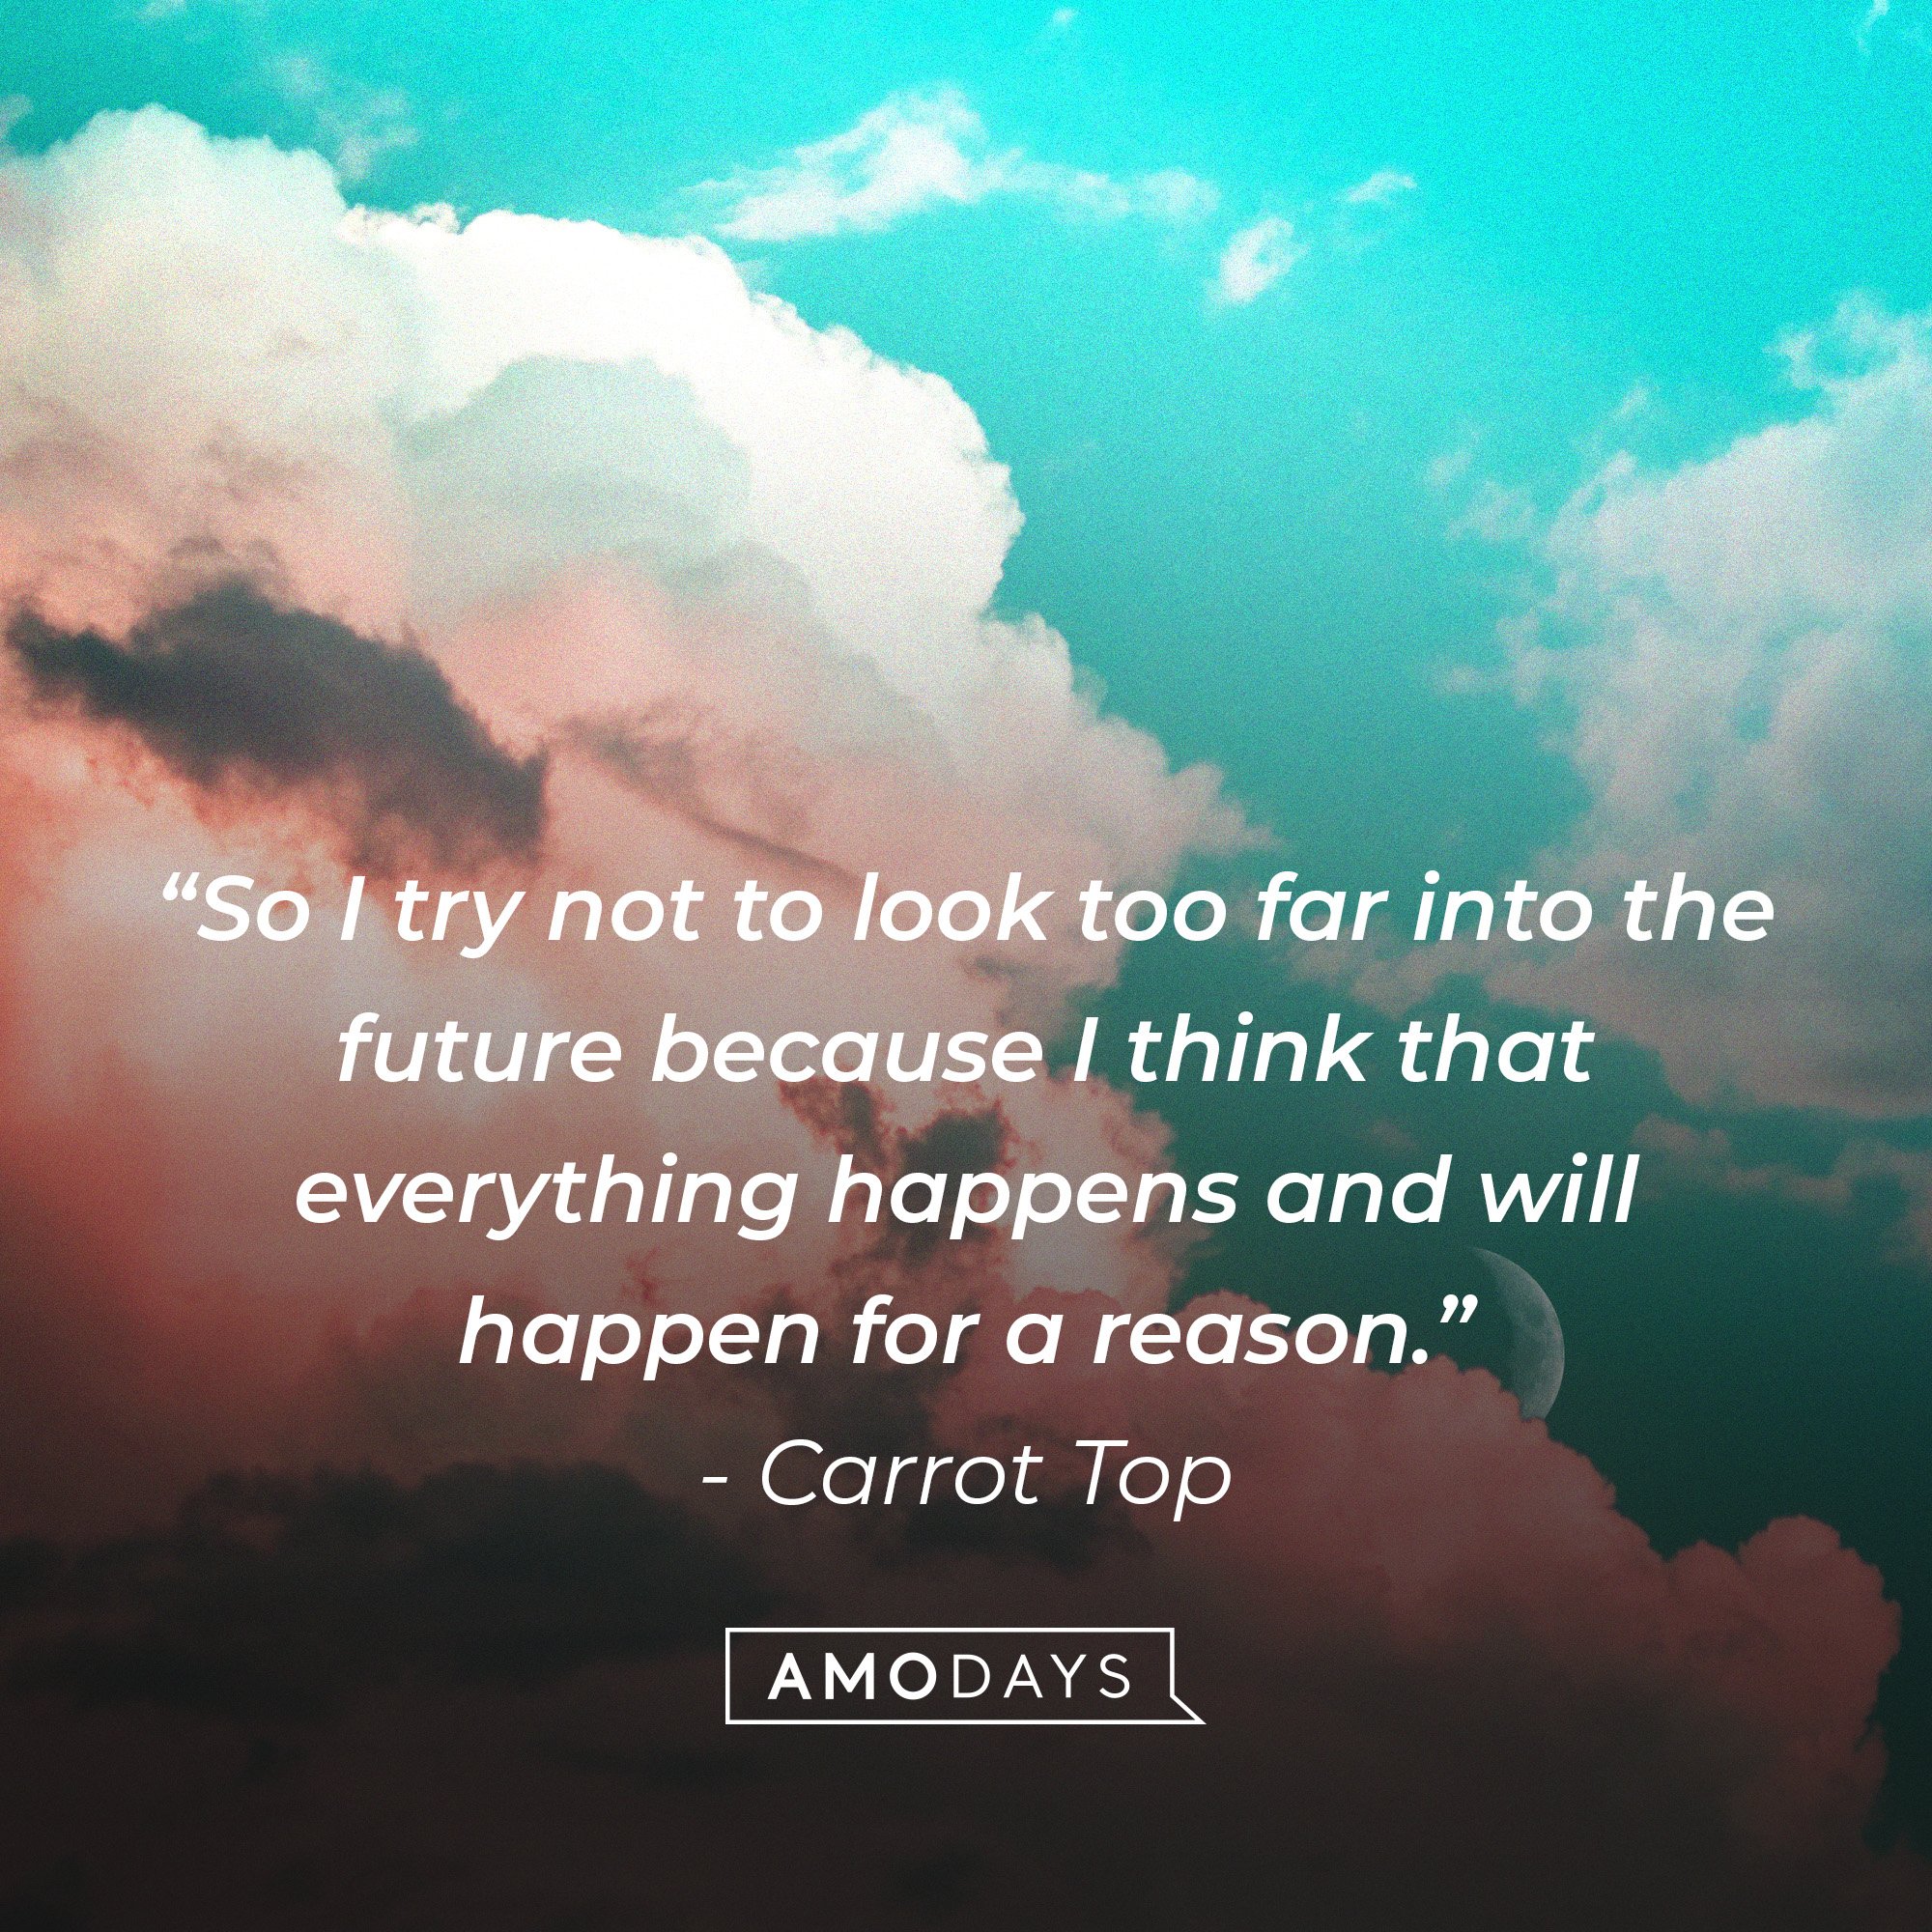 Carrot Top's quote: “So I try not to look too far into the future because I think that everything happens and will happen for a reason.” | Image: AmoDays